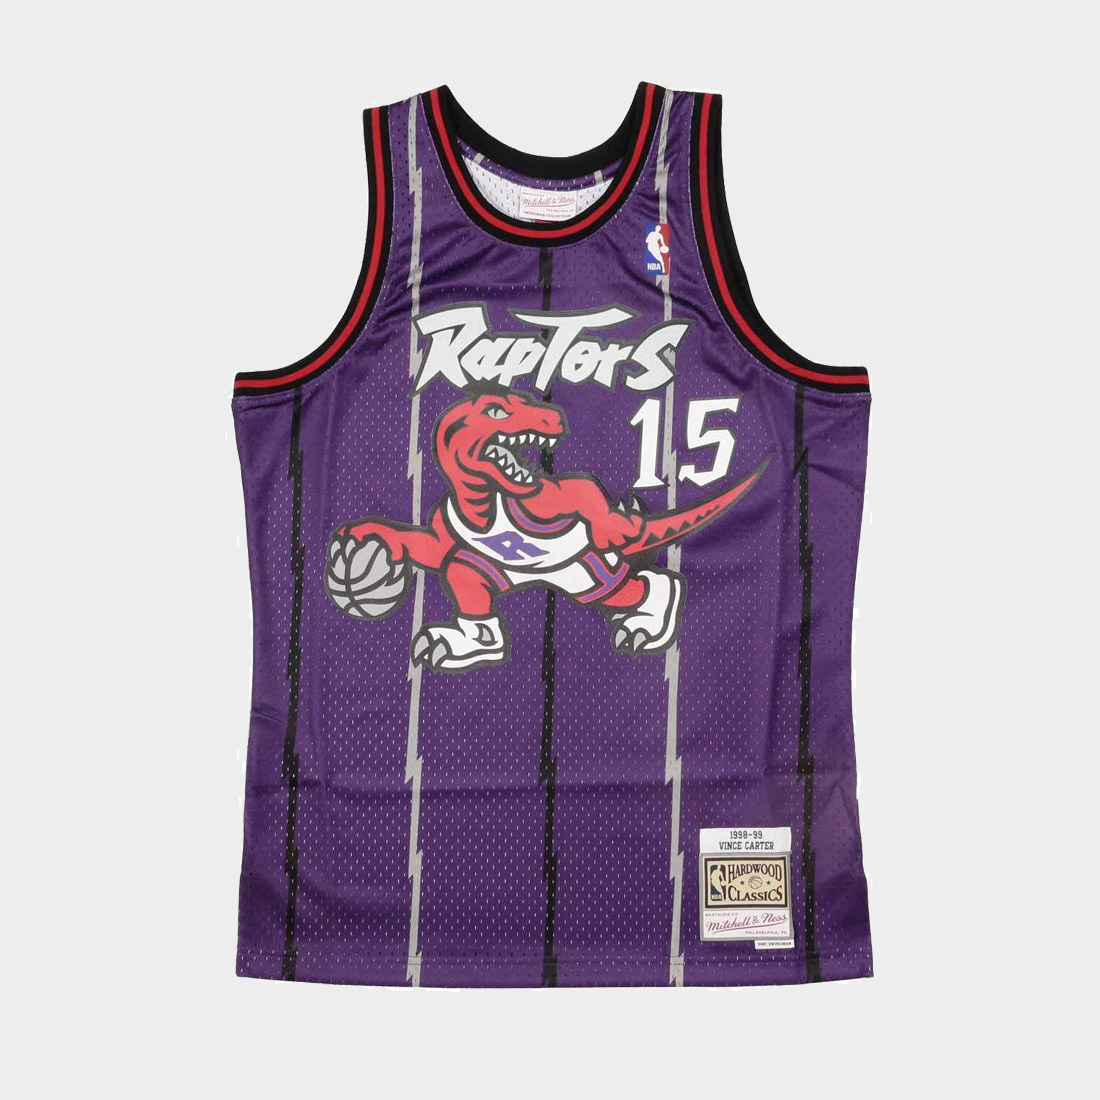 vince carter raptors jersey mitchell and ness